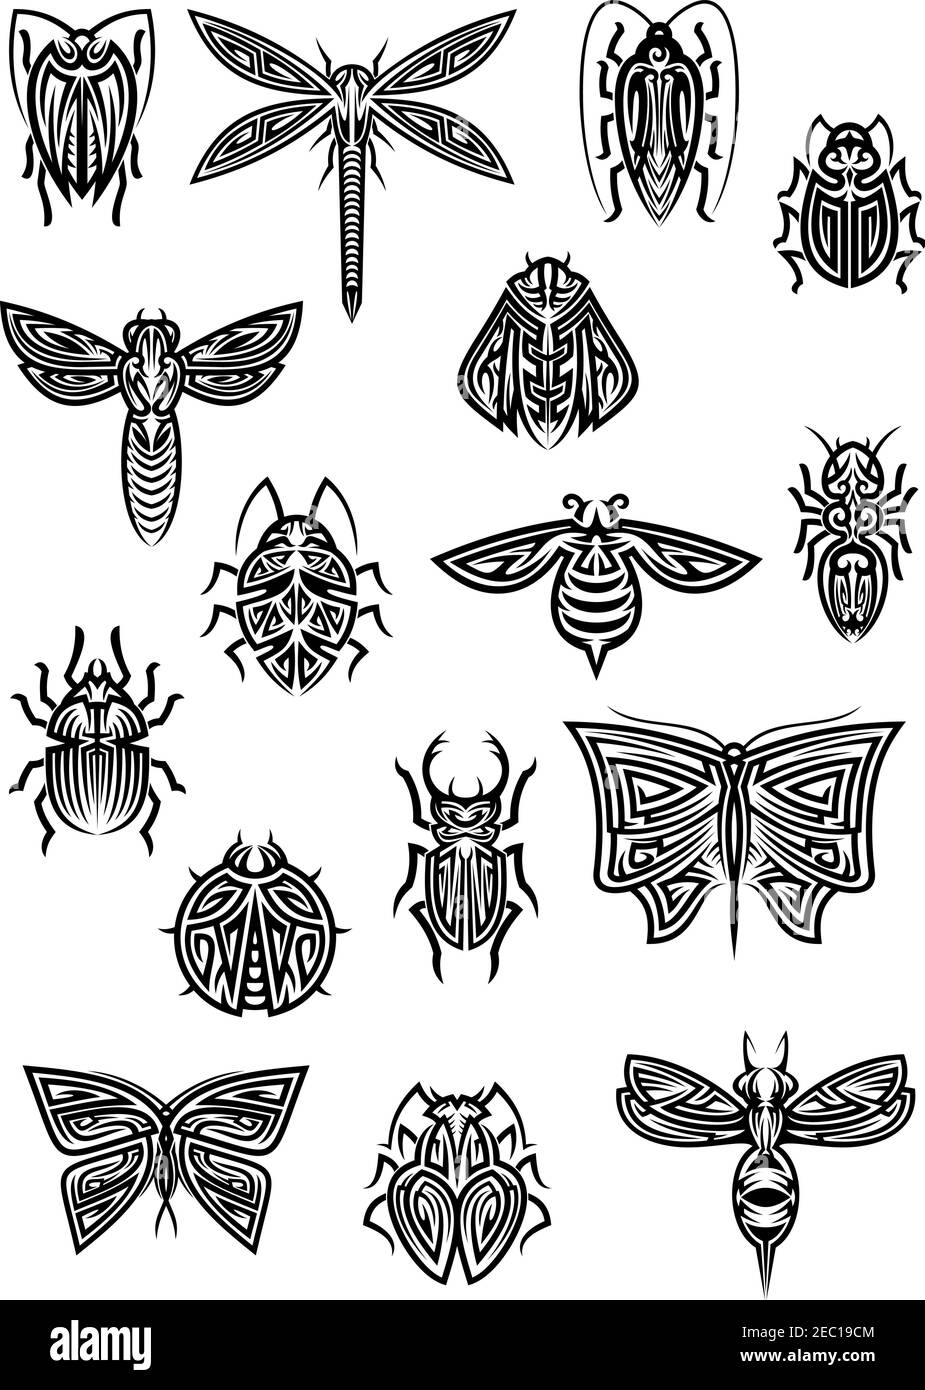 Unique Insect Tattoo Ideas For Your Next Ink